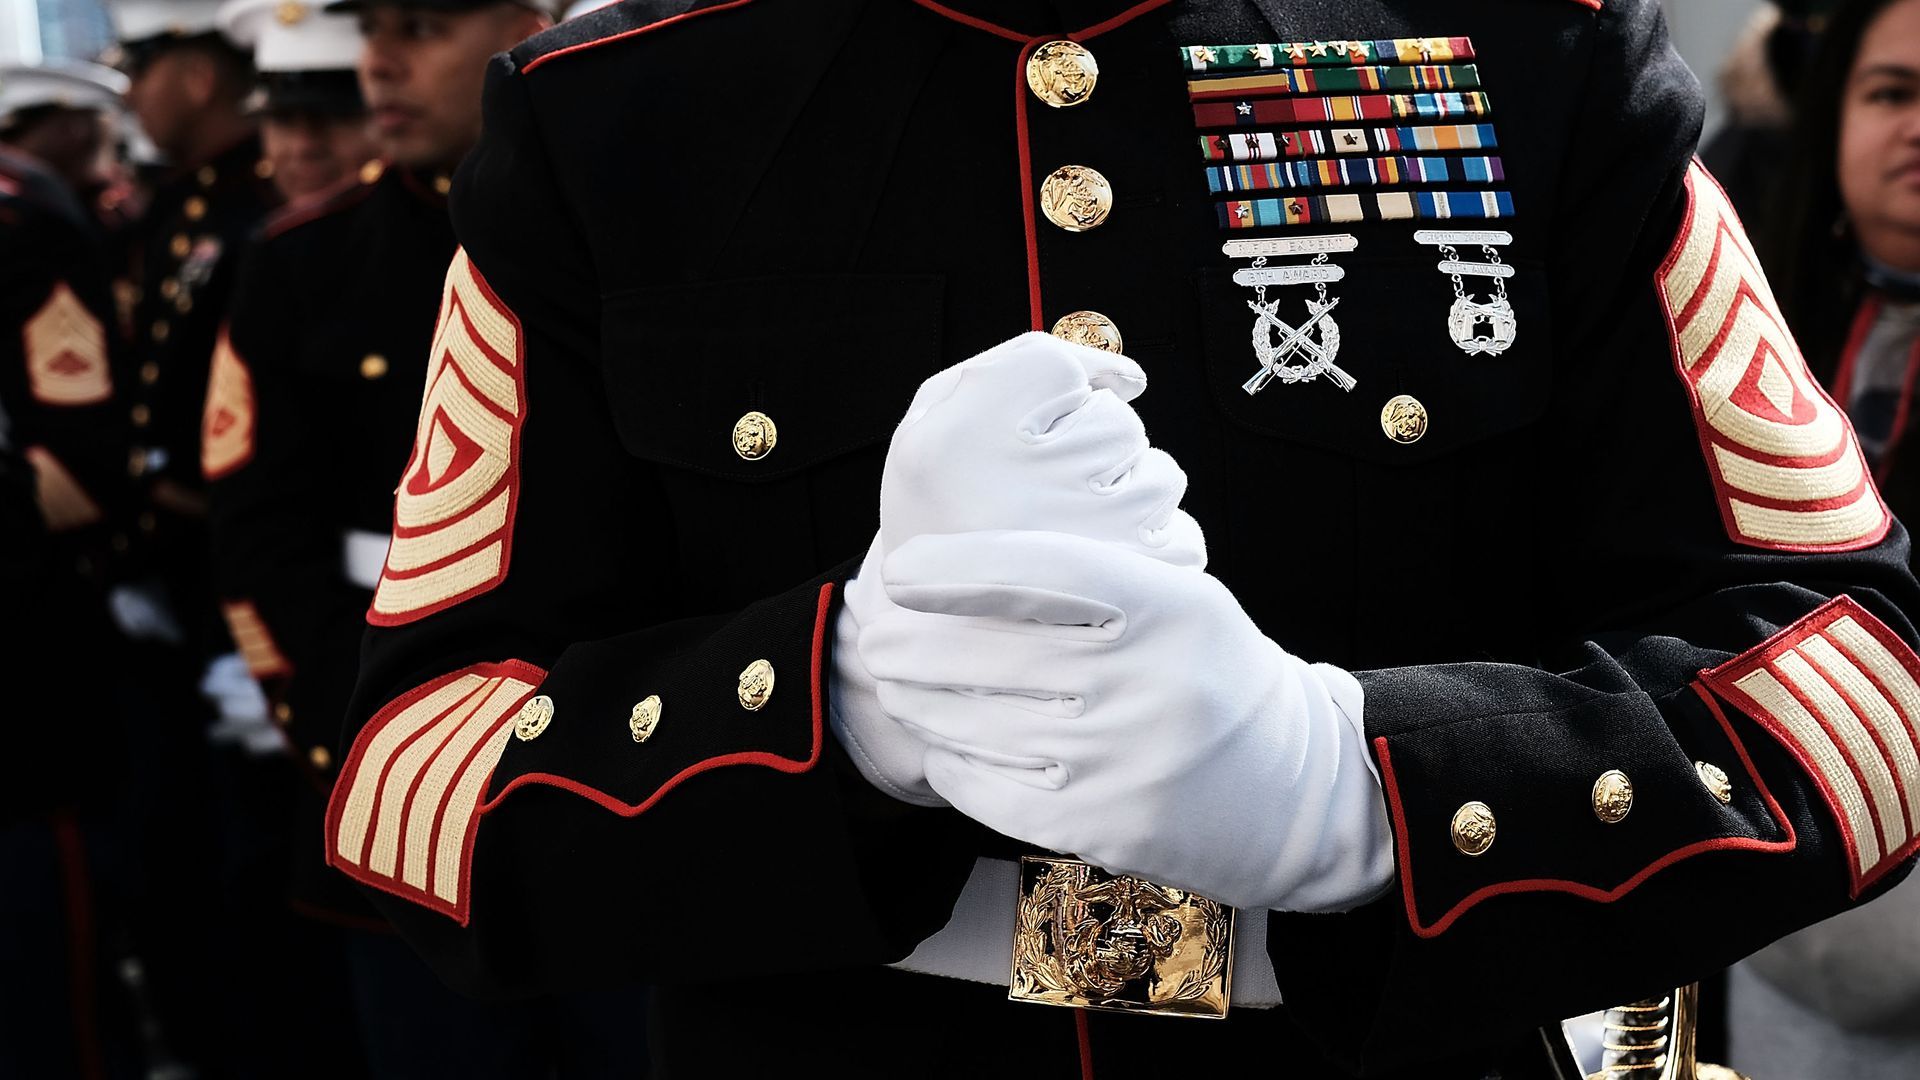 Two officials say sexual misconduct from Marine officer went ignored